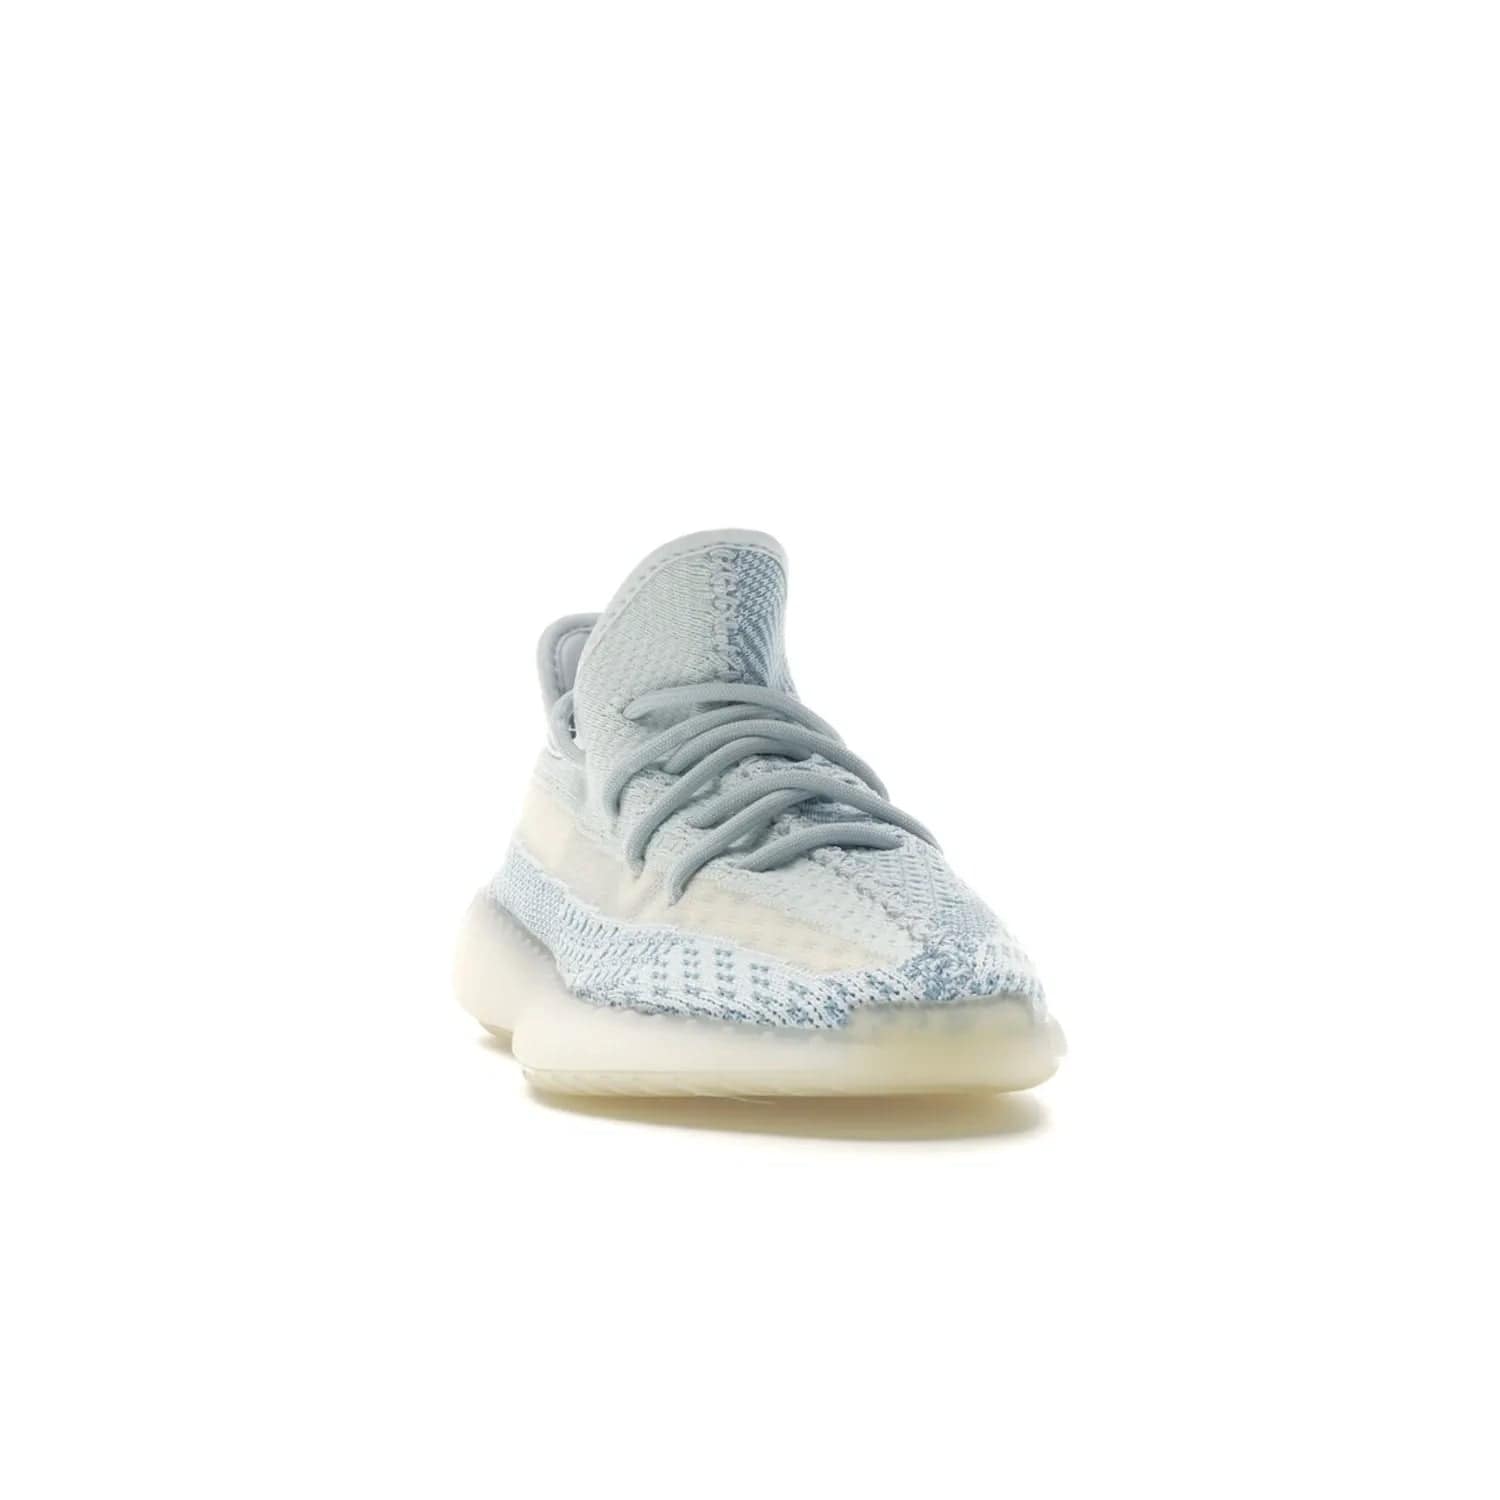 adidas Yeezy Boost 350 V2 Cloud White (Non-Reflective) - Image 8 - Only at www.BallersClubKickz.com - Adidas Yeezy Boost 350 V2 Cloud White (Non-Reflective) features Primeknit fabric and a unique, eye-catching design of cream, bluish-white, and transparent strip. Step out in timeless style with this eye-catching sneaker.